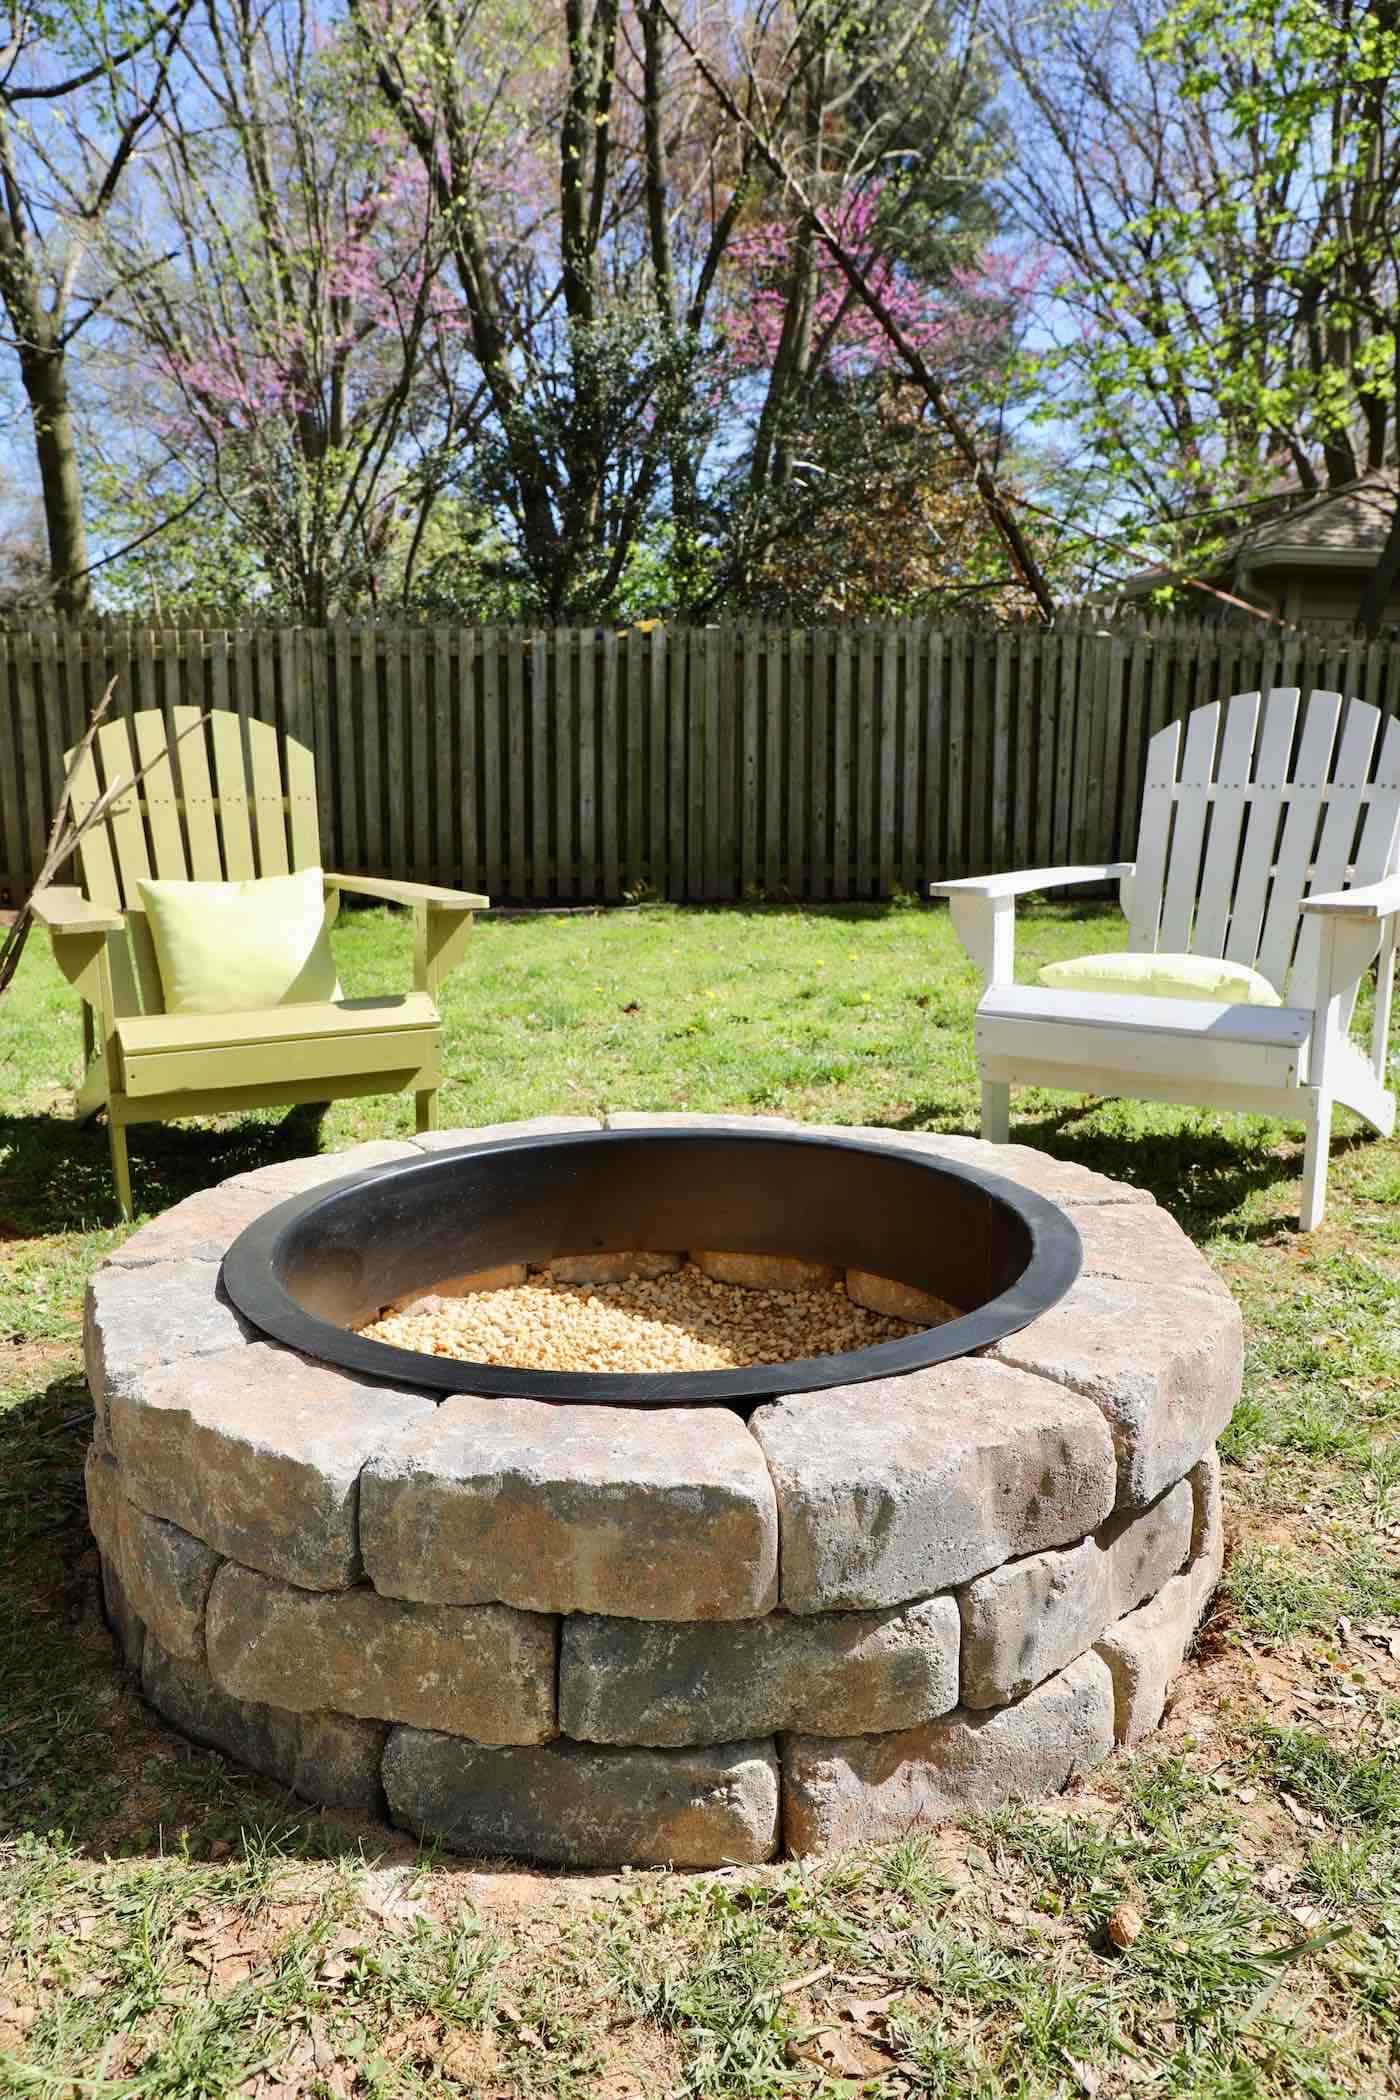 Diy Fire Pit With Gravel Stones, Stone Fire Pits Images